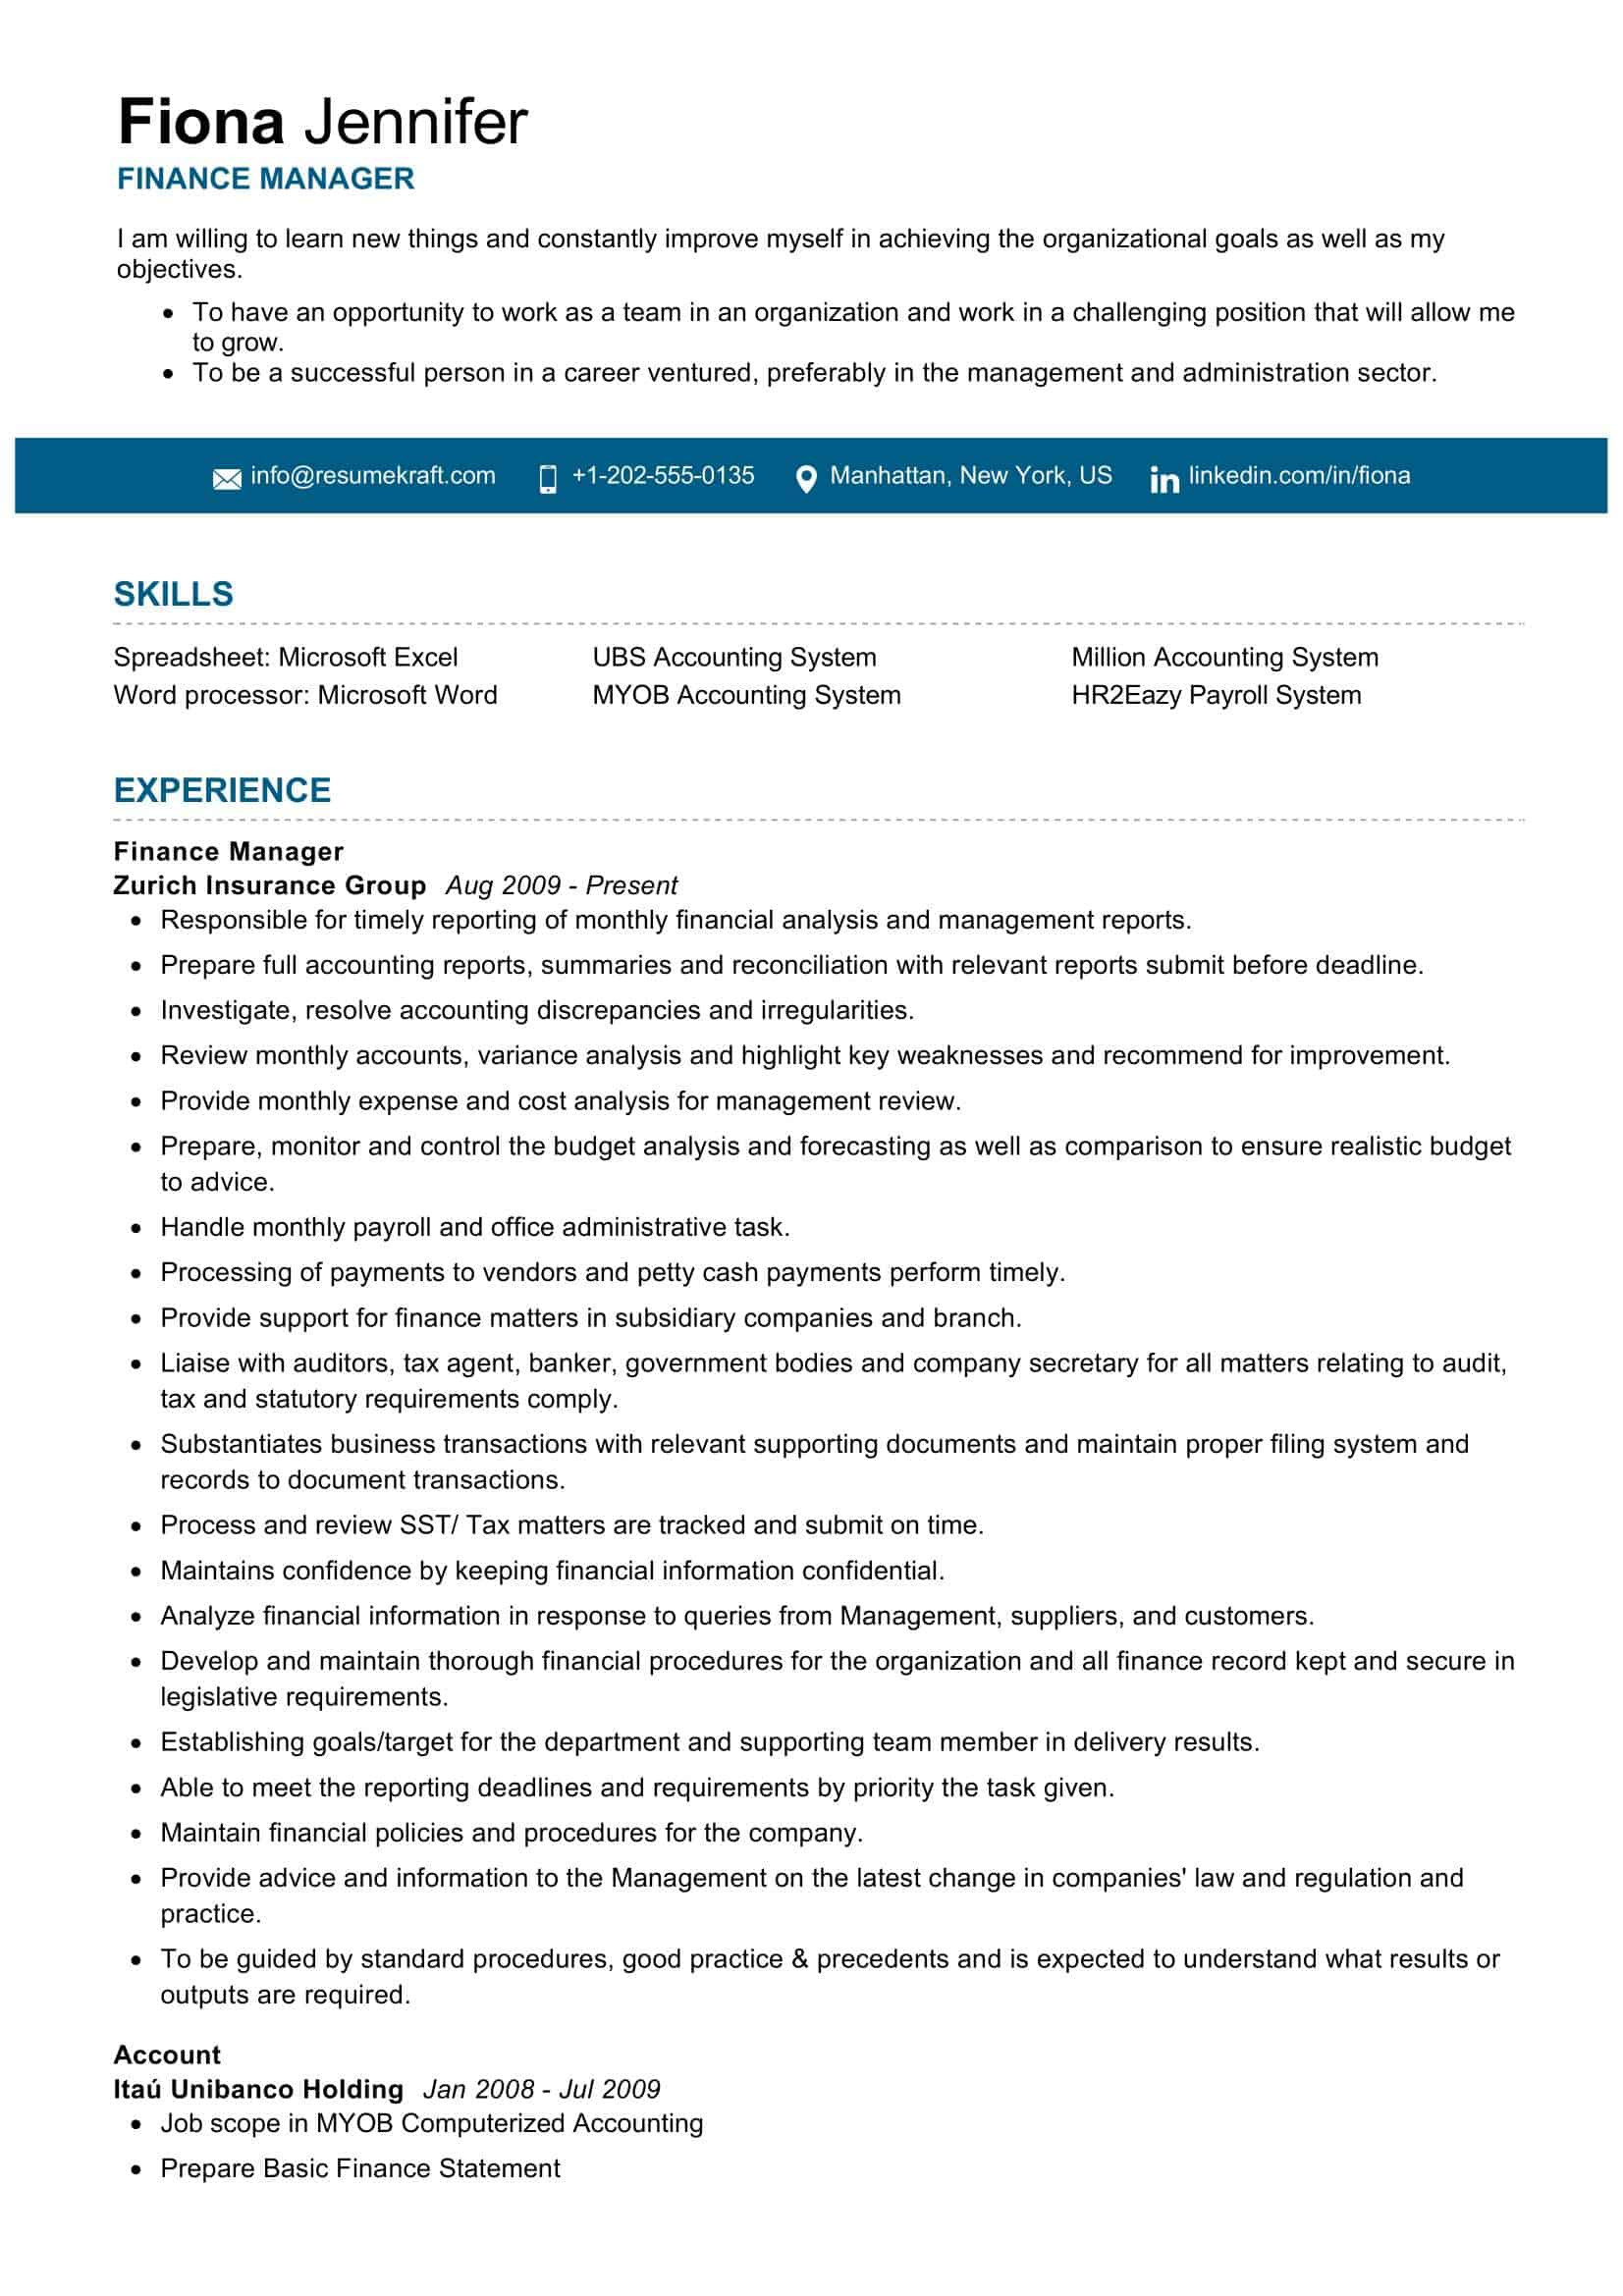 Finance and Accounts Manager Resume Sample Finance Manager Resume Sample 2022 Writing Tips – Resumekraft